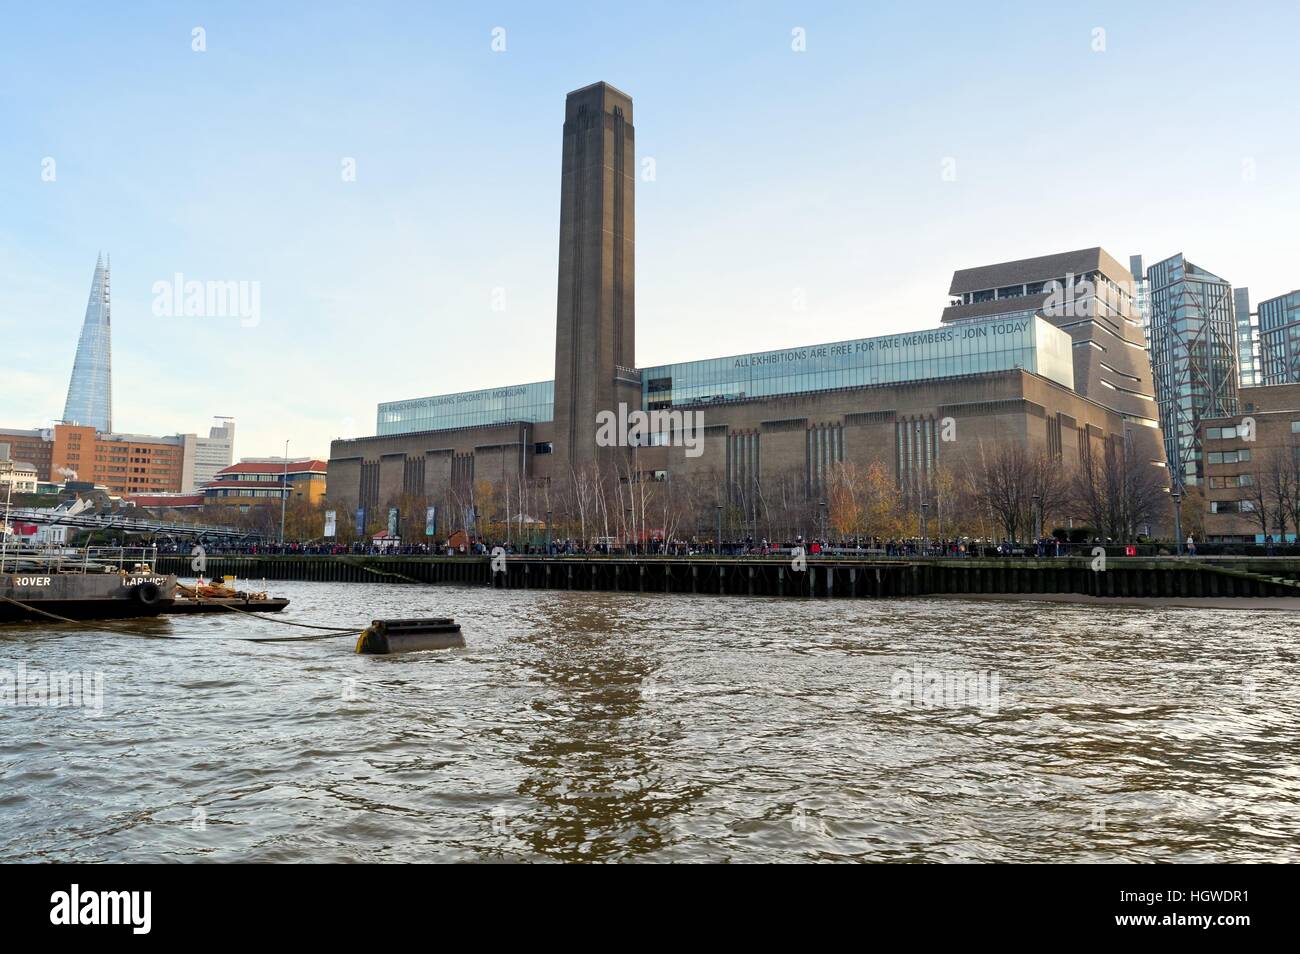 Exterior of the Tate Modern art gallery from the River Thames London UK Stock Photo